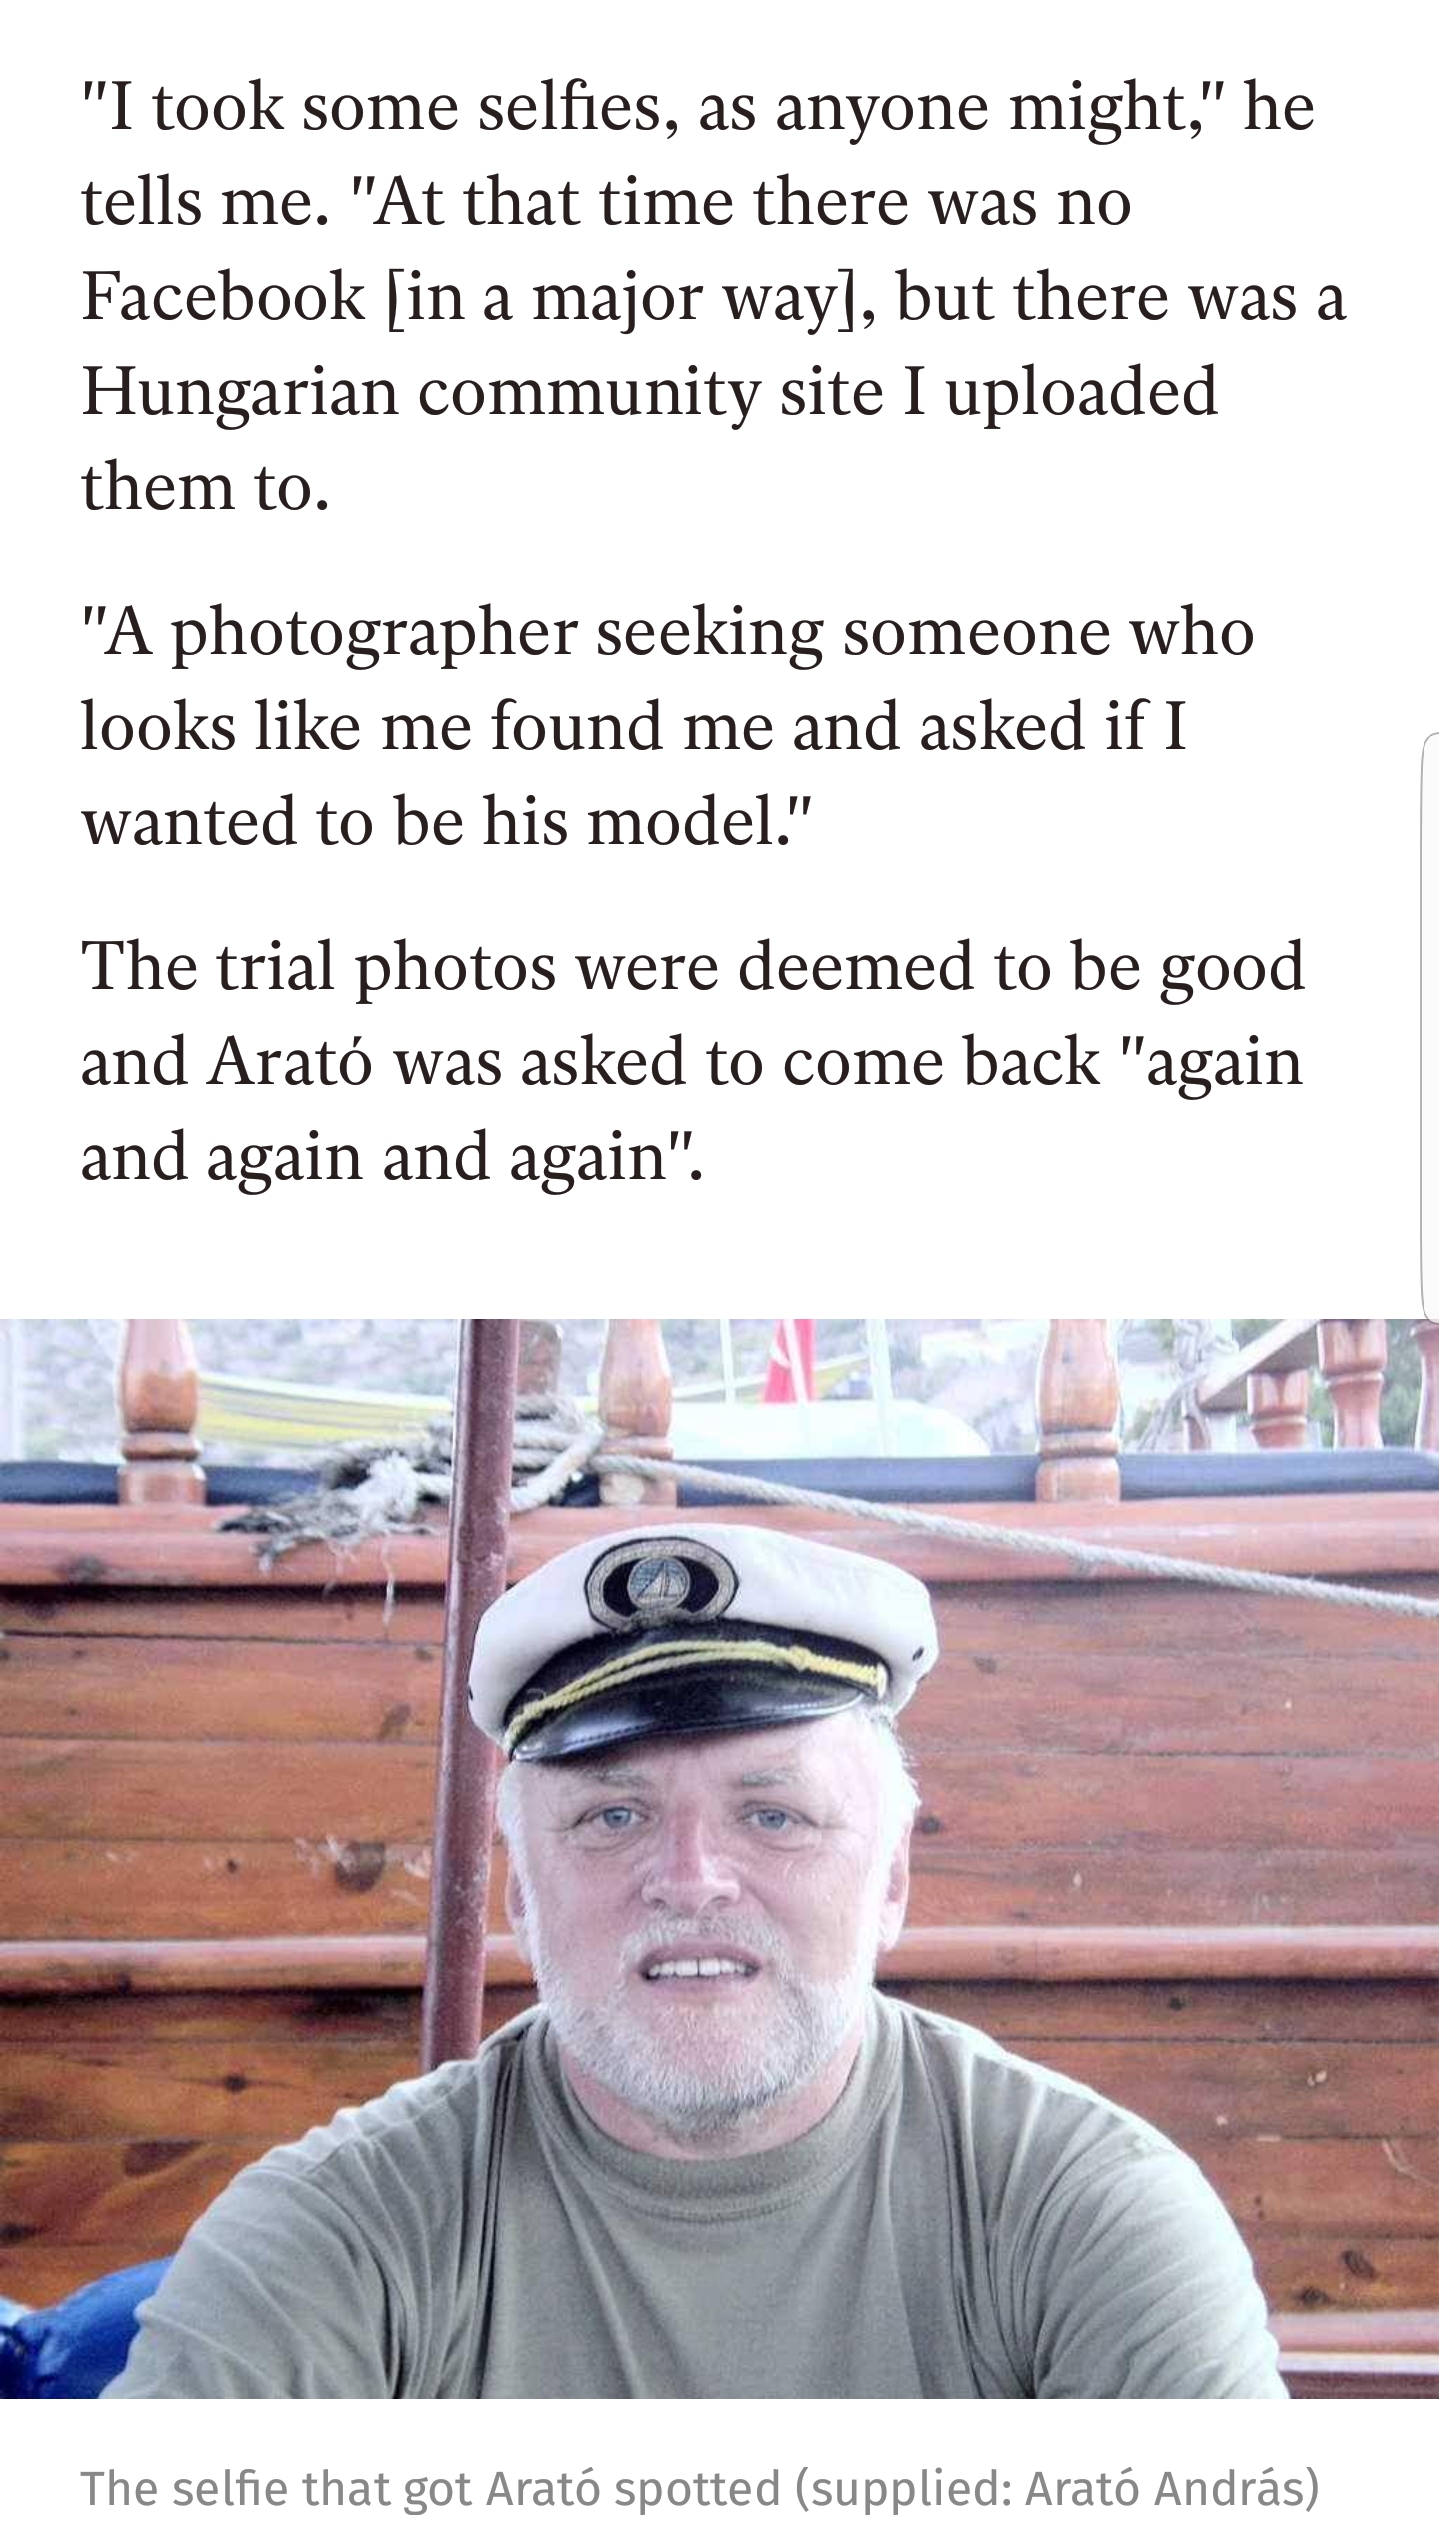 hide the pain harold age - "I took some selfies, as anyone might," he tells me. "At that time there was no Facebook in a major way, but there was a Hungarian community site I uploaded them to. "A photographer seeking someone who looks me found me and aske